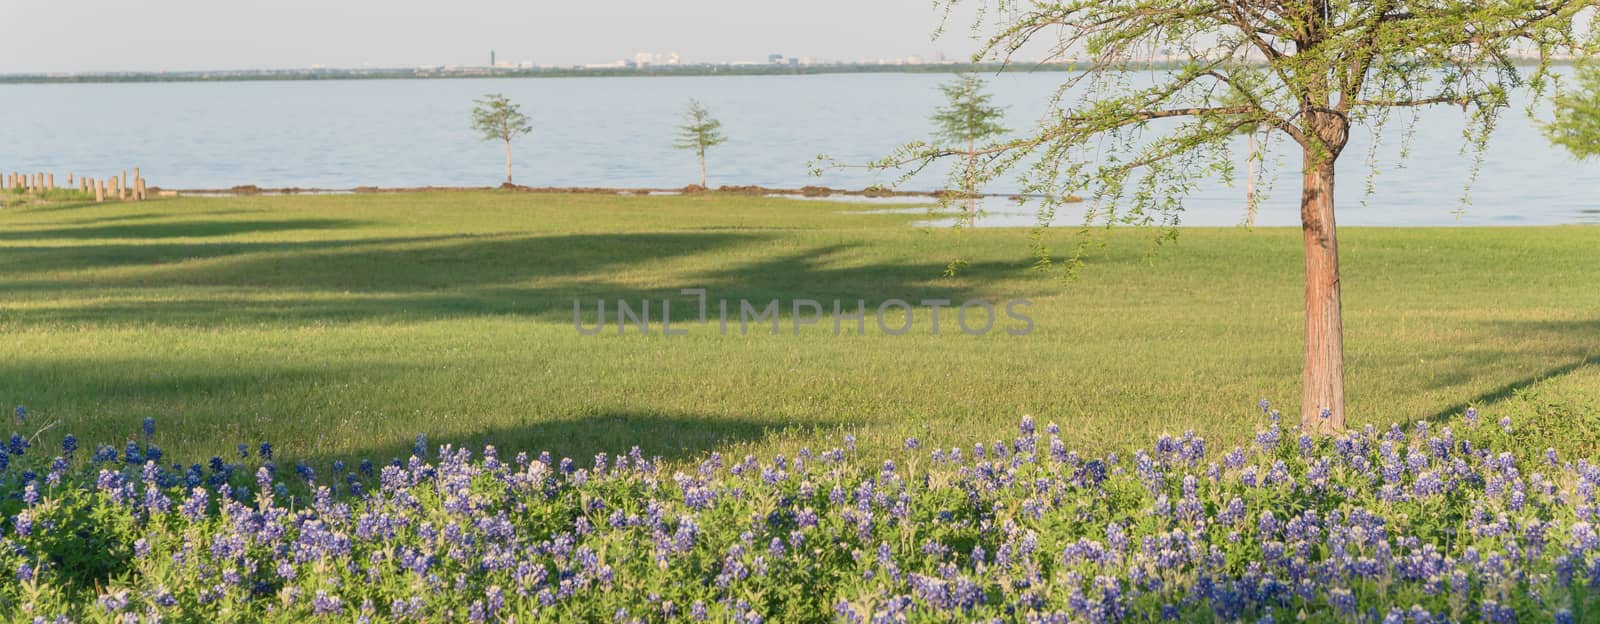 Panoramic view Texas state flower Bluebonnet blooming near the lake in springtime by trongnguyen